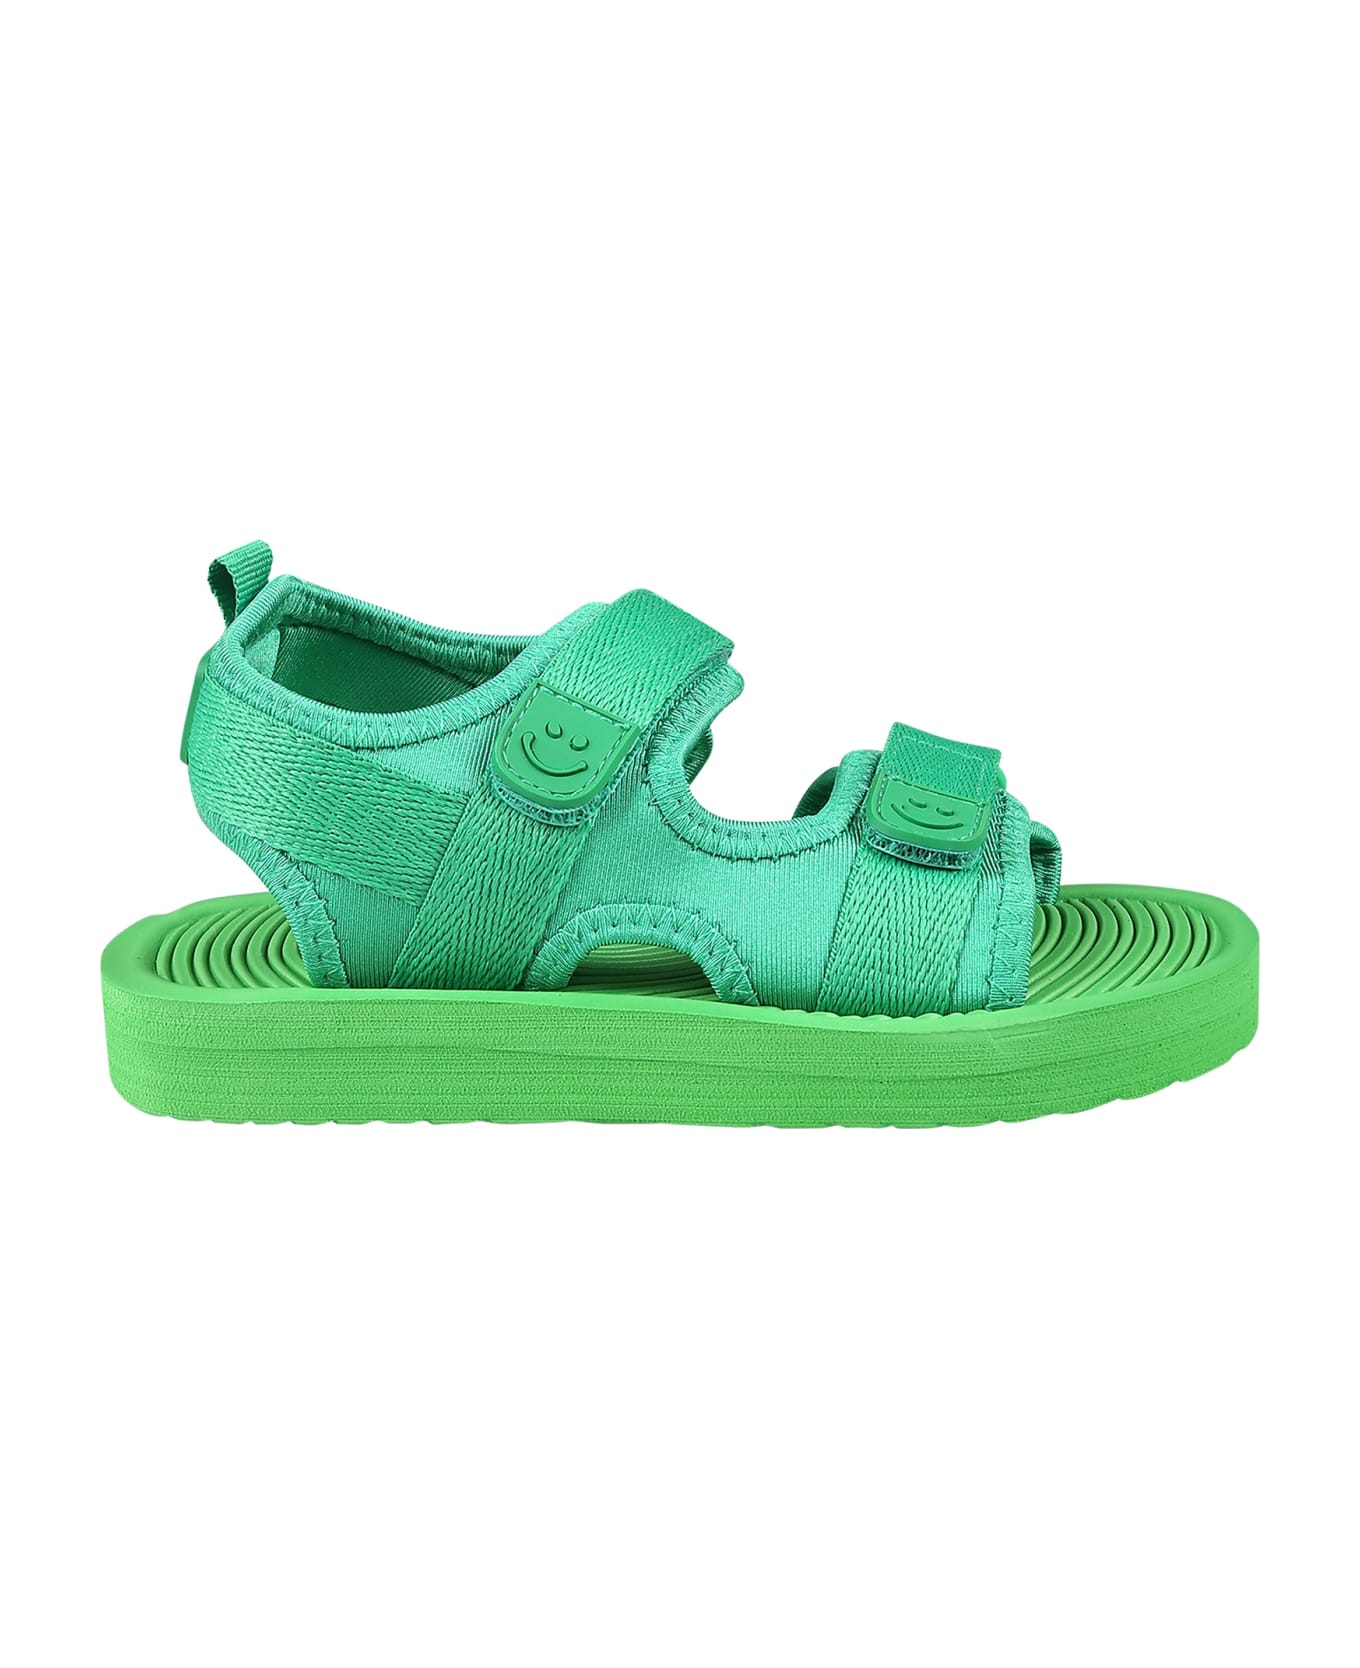 Molo Green Sandals For Babykids With Logo - Green シューズ